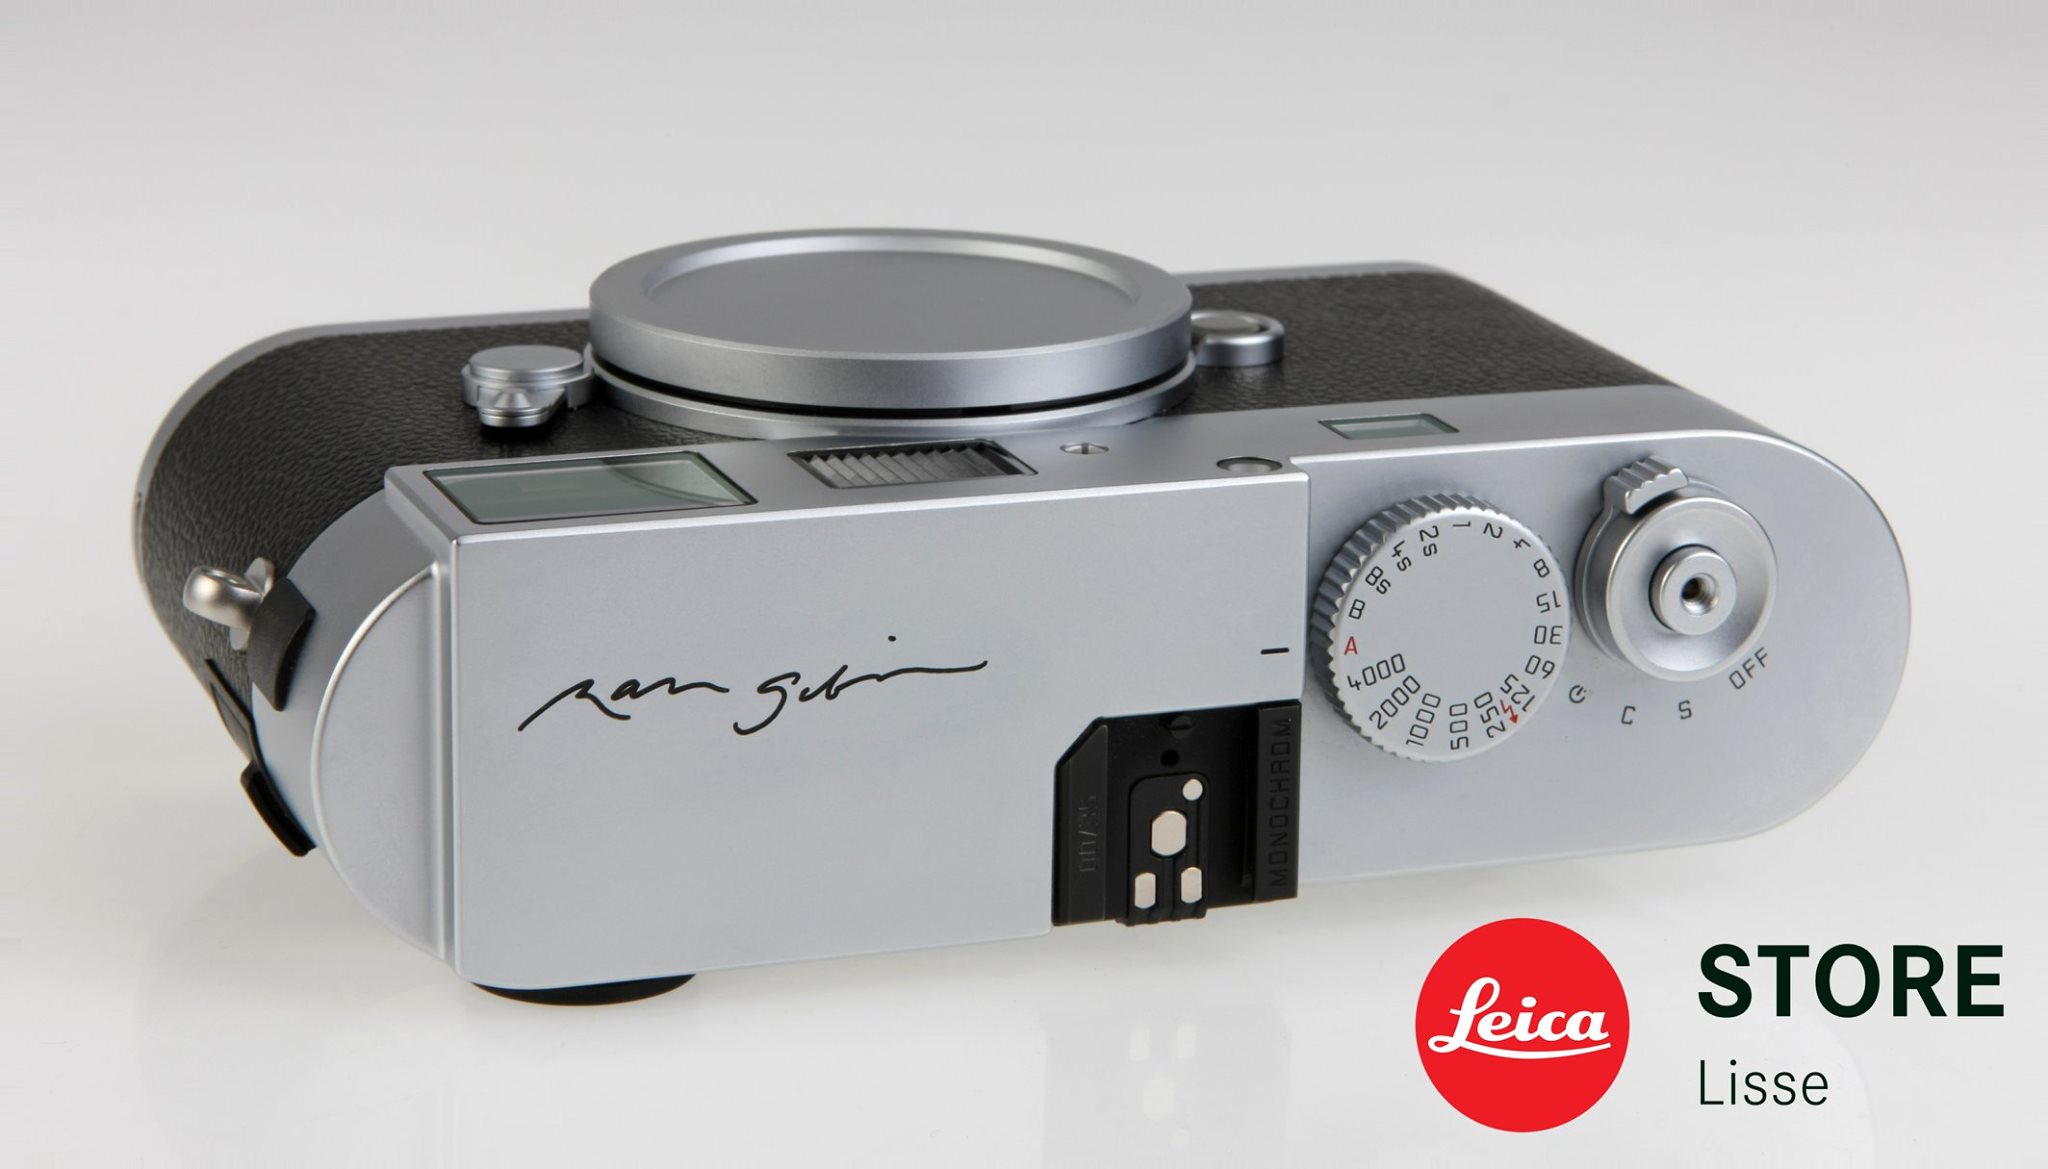 Leica unveils D-Lux 'Solid Gray' camera with two-tone silver and grey  styling - Leica Rumors